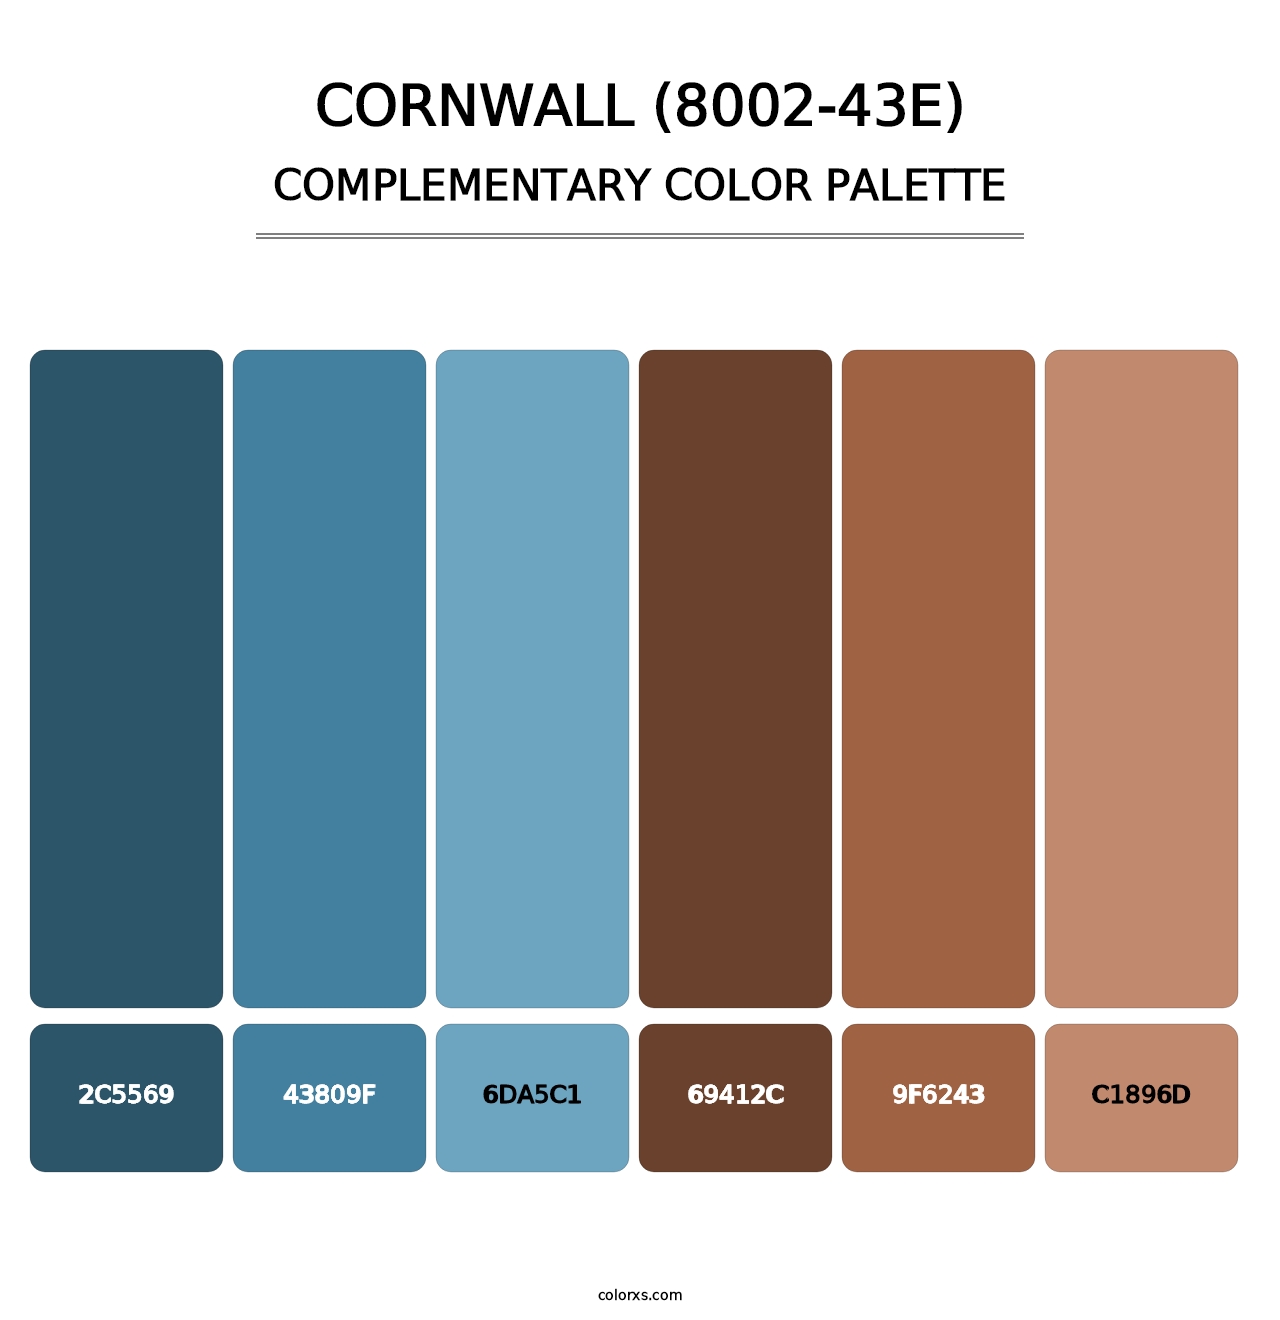 Cornwall (8002-43E) - Complementary Color Palette